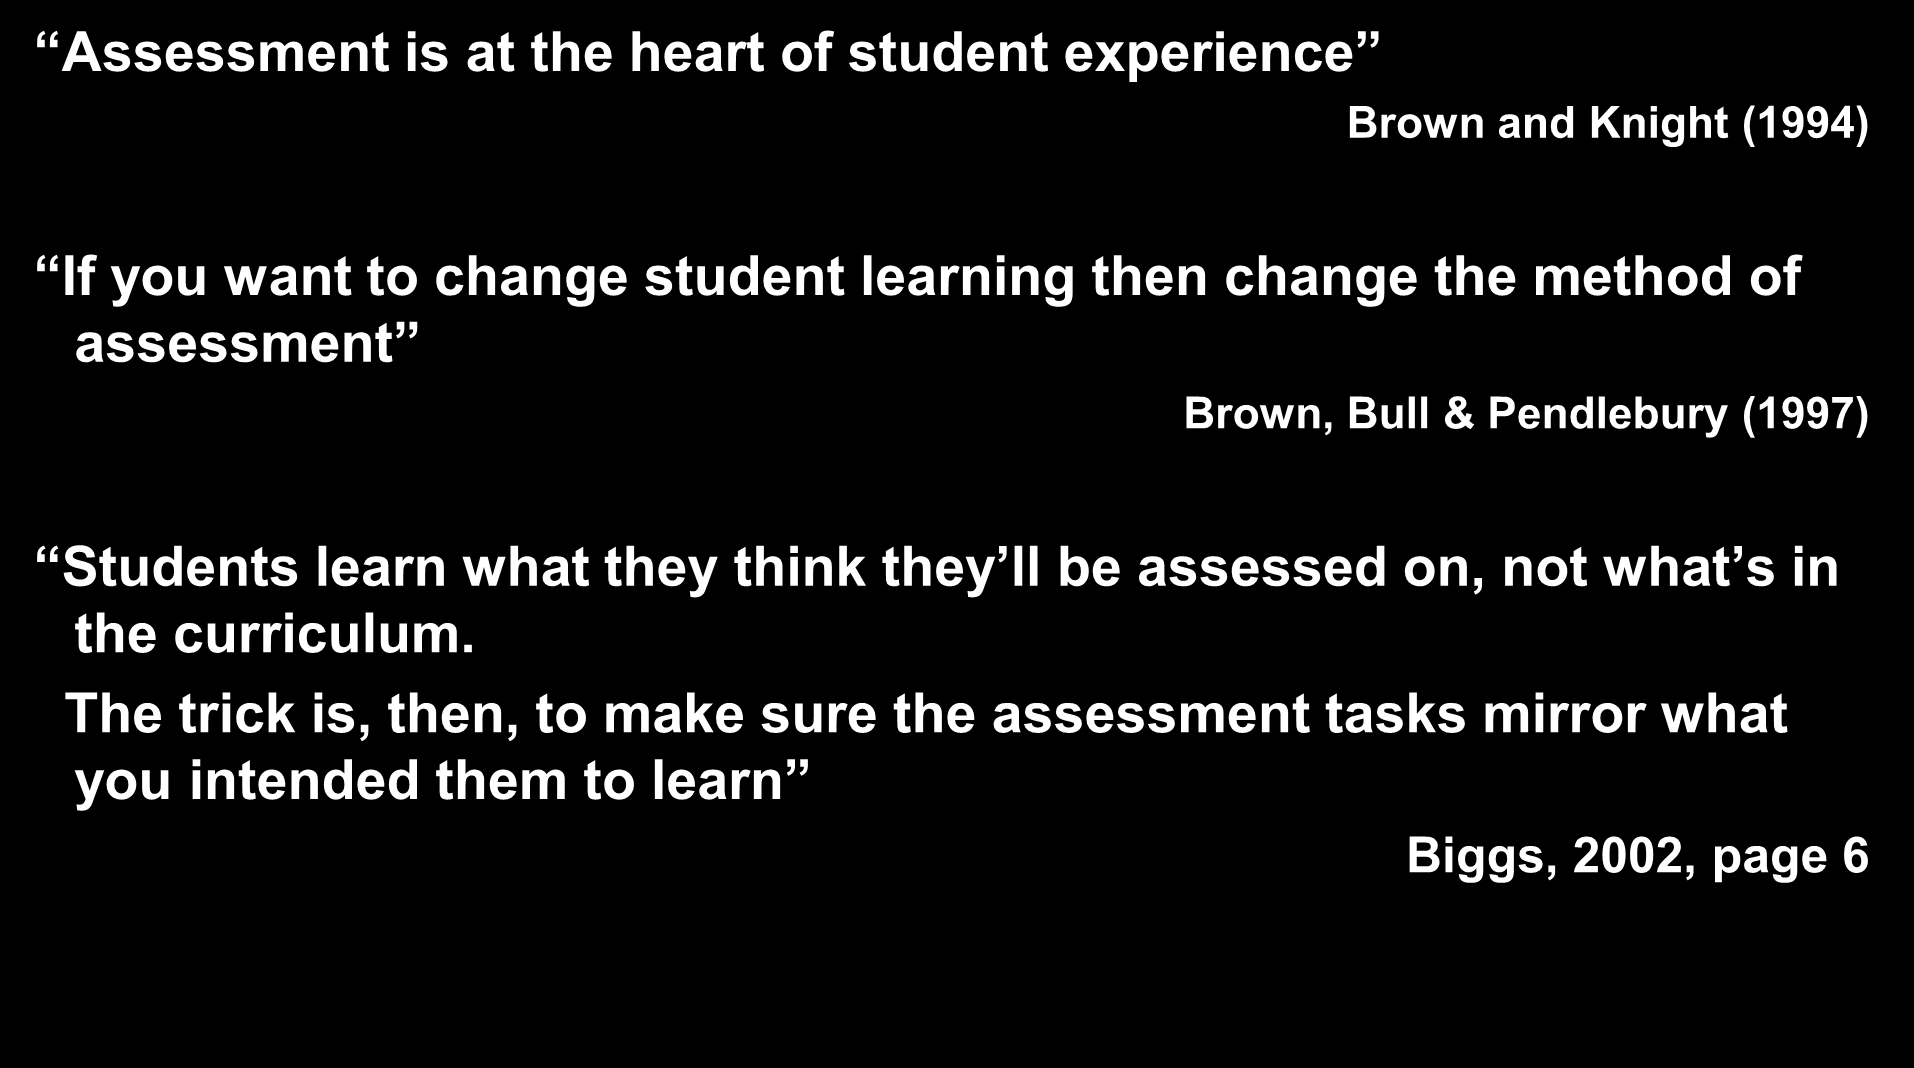 Assessment is at the heart of student experience Brown and Knight (1994) If you want to change student learning then change the method of assessment Brown, Bull & Pendlebury (1997)